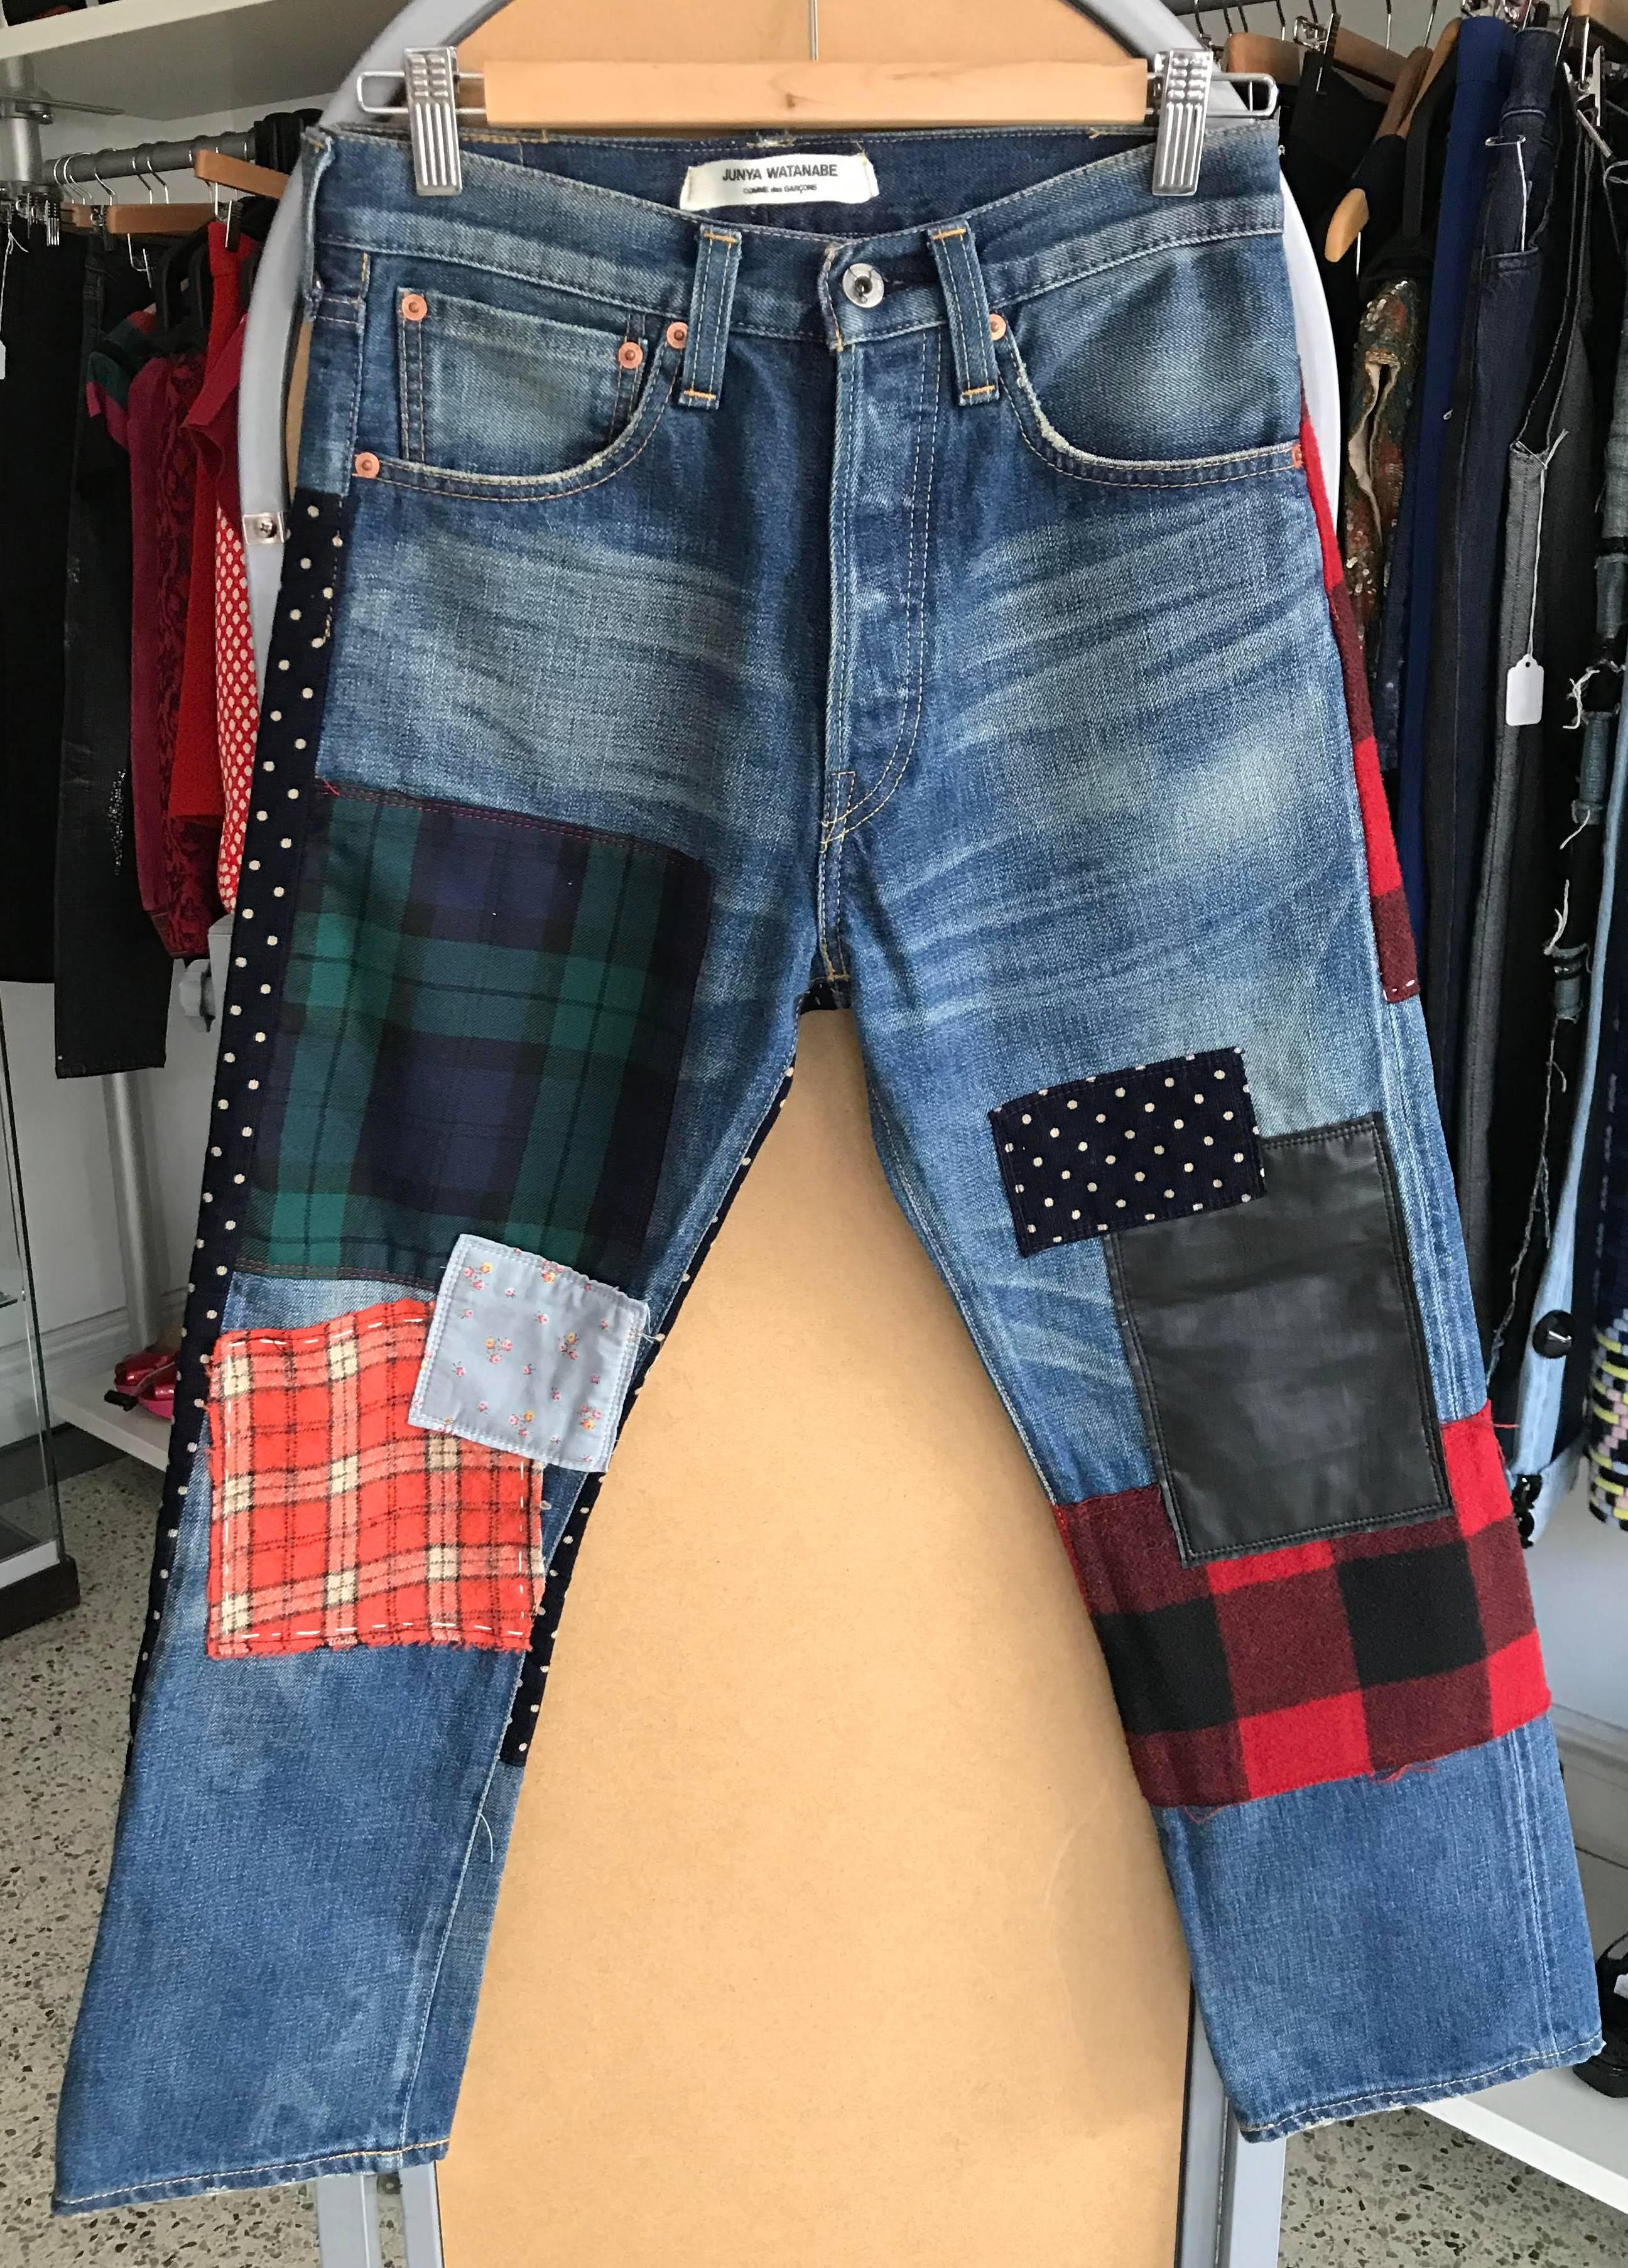 Junya Watanabe Comme Des Garcons multicolor Patchwork Denim Jeans.  Tagged size XS (Best for USA 0/2 or jeans size 24/25). Garment to fit up to 33